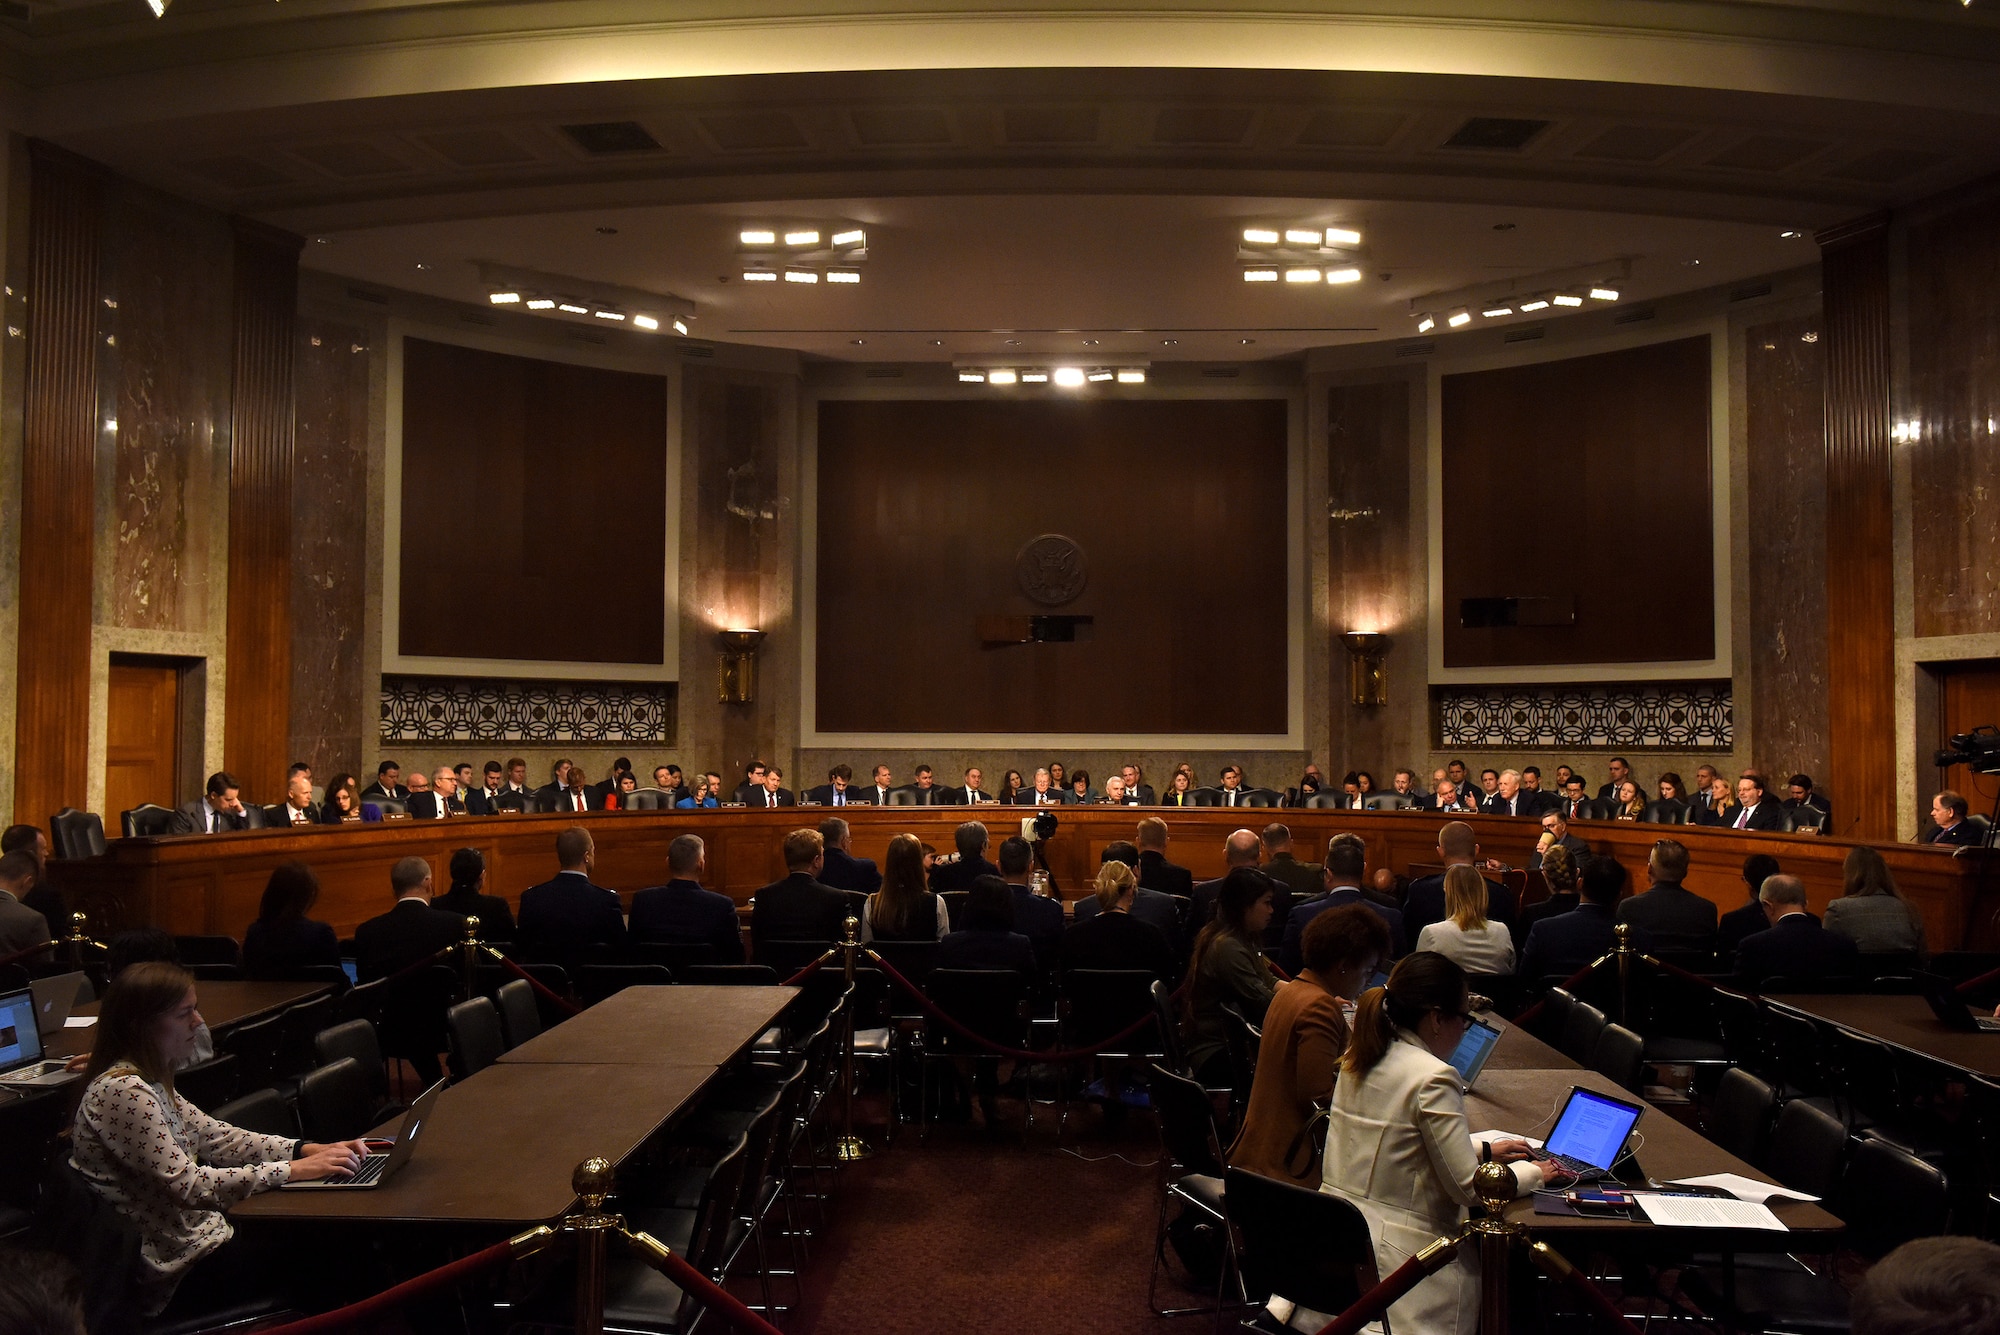 Secretary of the Air Force Heather Wilson testifies on the proposal to establish a United States Space Force during a Senate Armed Services Committee hearing in Washington, D.C., April 11, 2019. (U.S. Air Force photo by Staff Sgt. Rusty Frank)